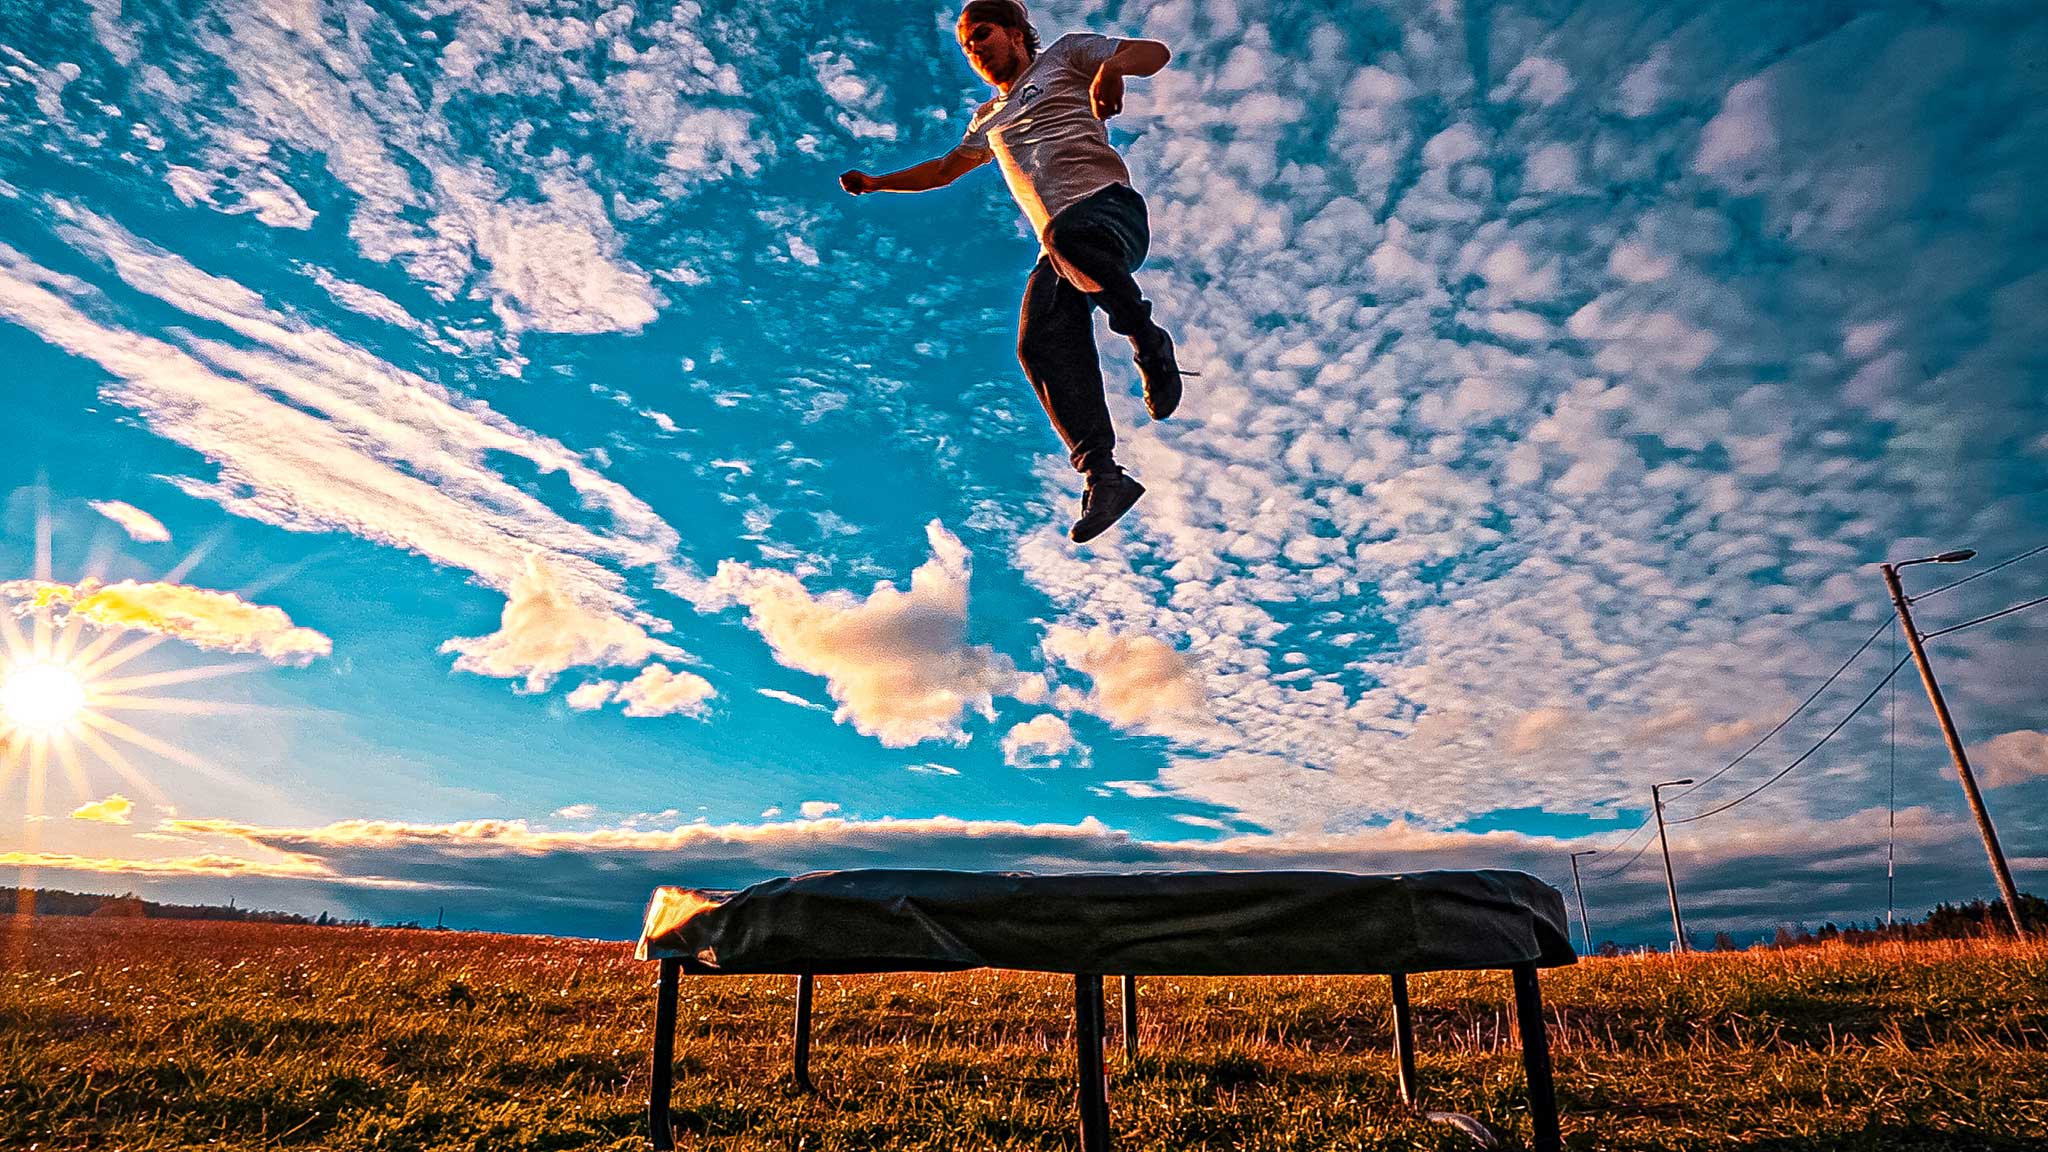 A man jumping on an Acon trampoline while sun is rising in the background.